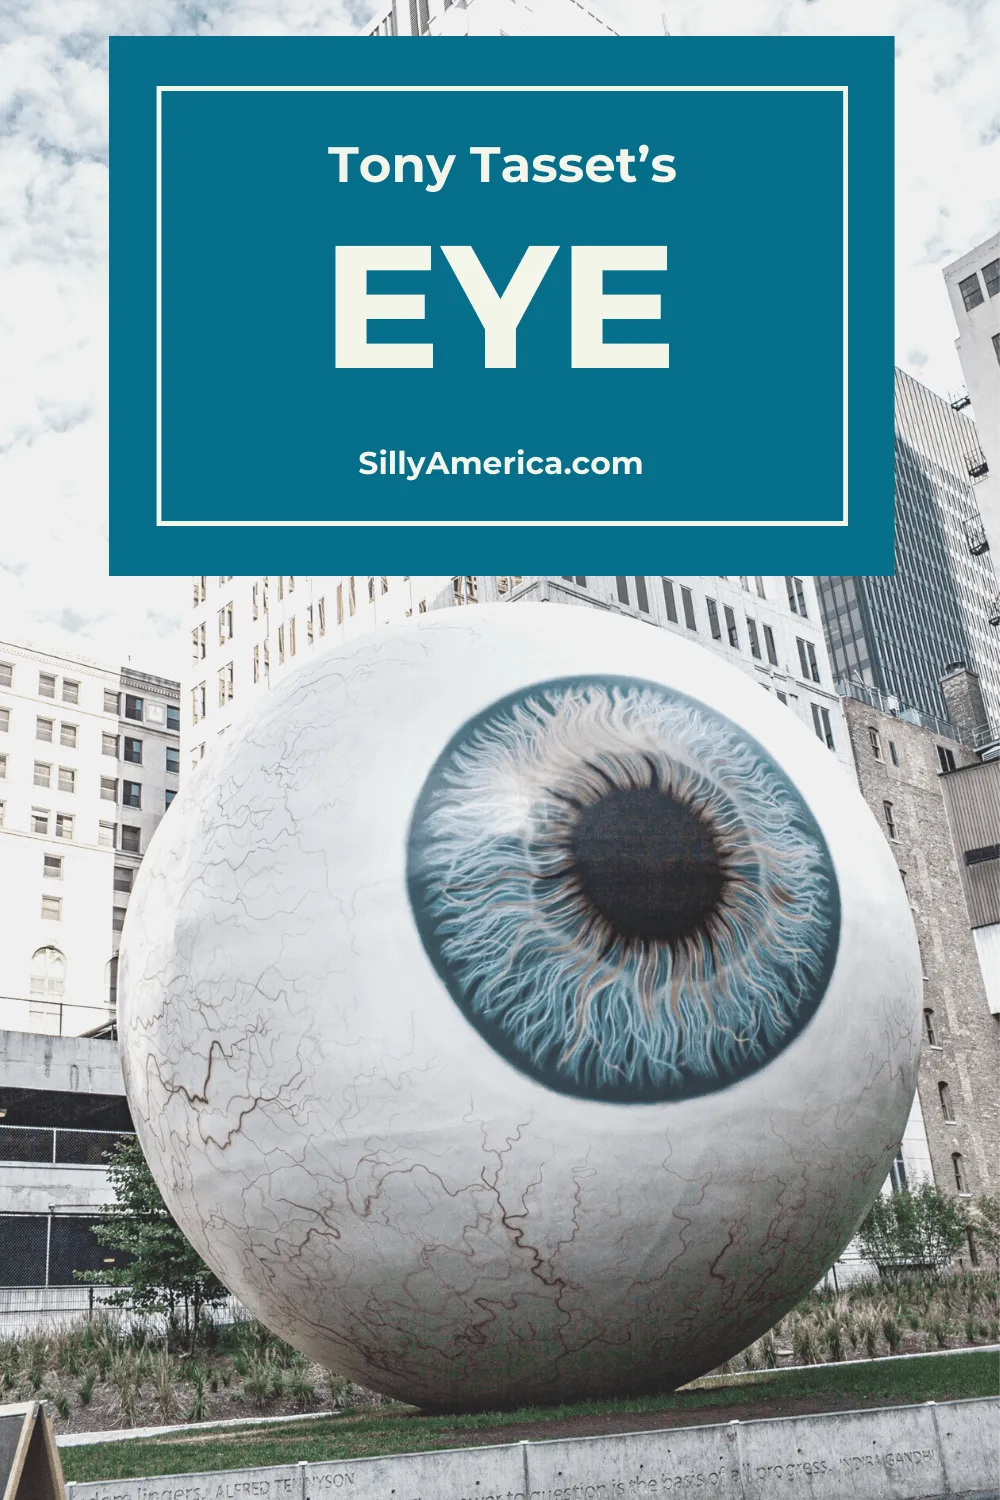 Tony Tasset’s Eye, a giant fiberglass eyeball at the Joule Hotel in Dallas, Texas was originally erected in Chicago, Illinois and constructed by FAST Fiberglass in Wisconsin. #RoadsideAttraction #RoadsideAttractions #WeirdRoadsideAttractions #VintageRoadsideAttractions #RoadTripStops #WorldsLargestRoadsideAttractions #RoadTrip #USARoadsideAttractions #AmericanRoadsideAttractions #USA #America #Texas #DallasTexas #TexasRoadsideAttractions #TexasRoadsideAttraction #TexasRoadTrip #TexasRoadTripMap